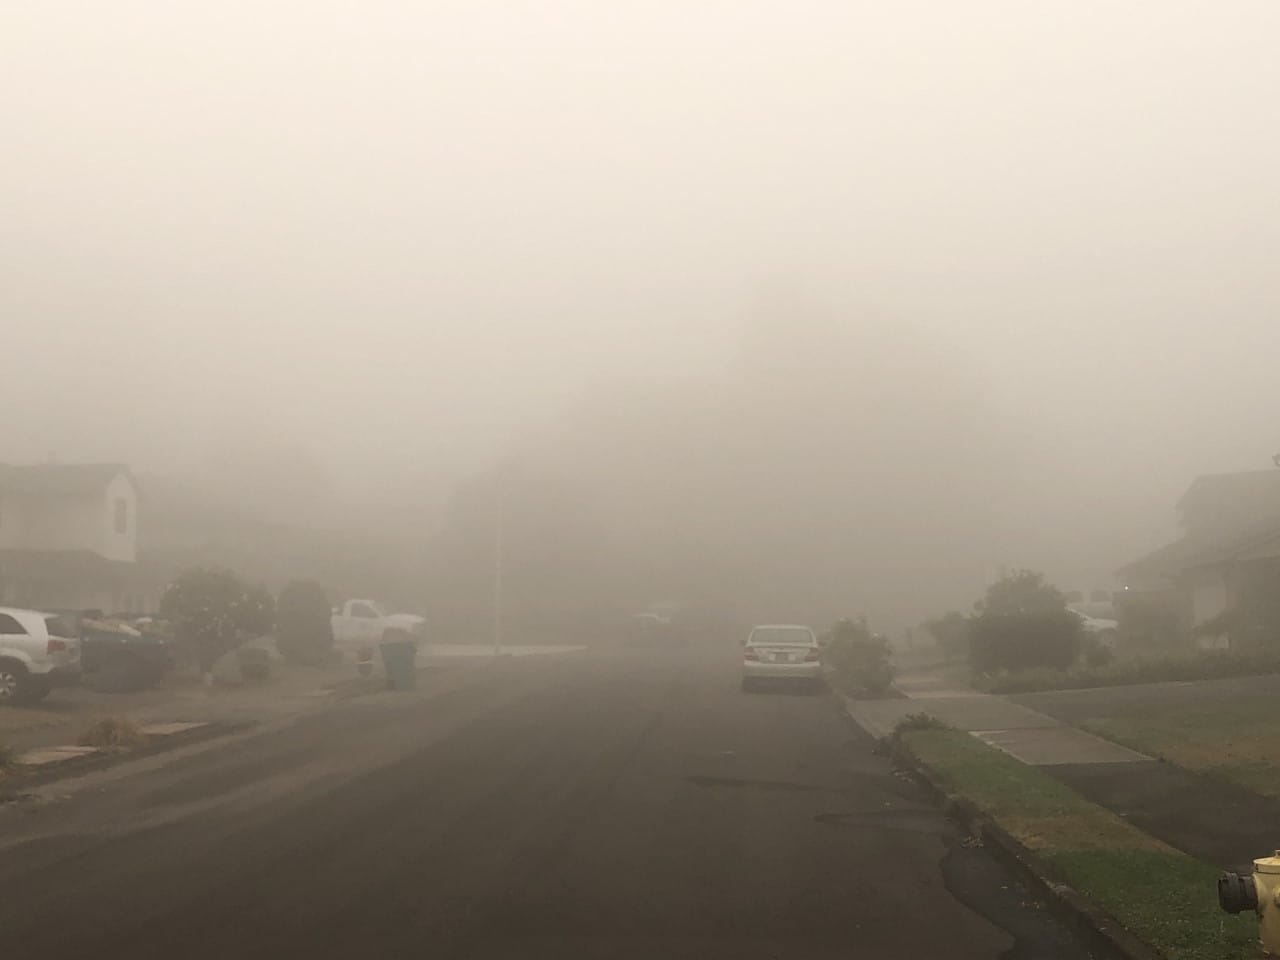 Dense fog and wildfire smoke clouded the air in Clark County on Sunday morning, leading to multiple alerts from the National Weather Service.